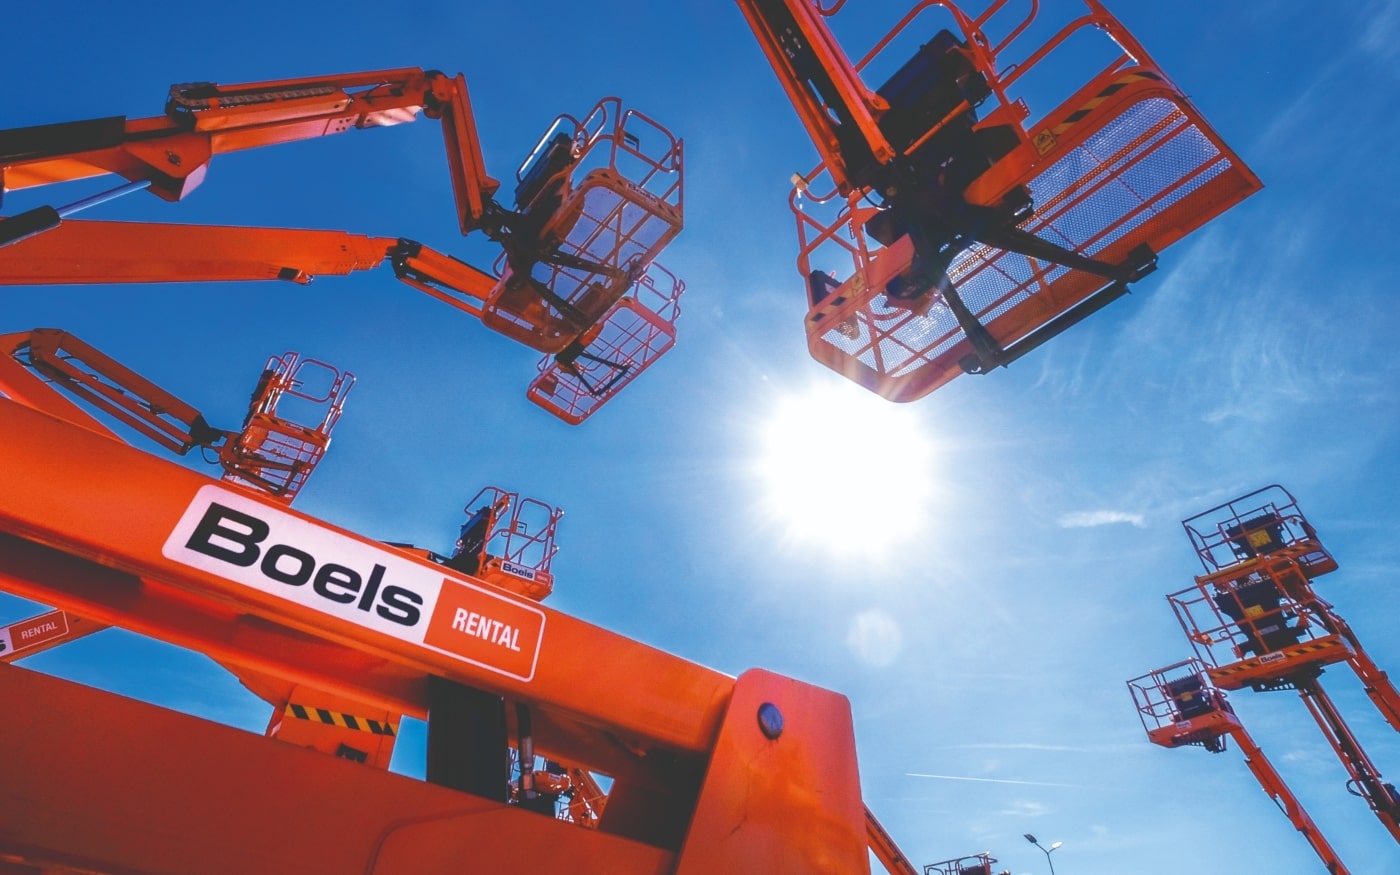 Boels keeps you going